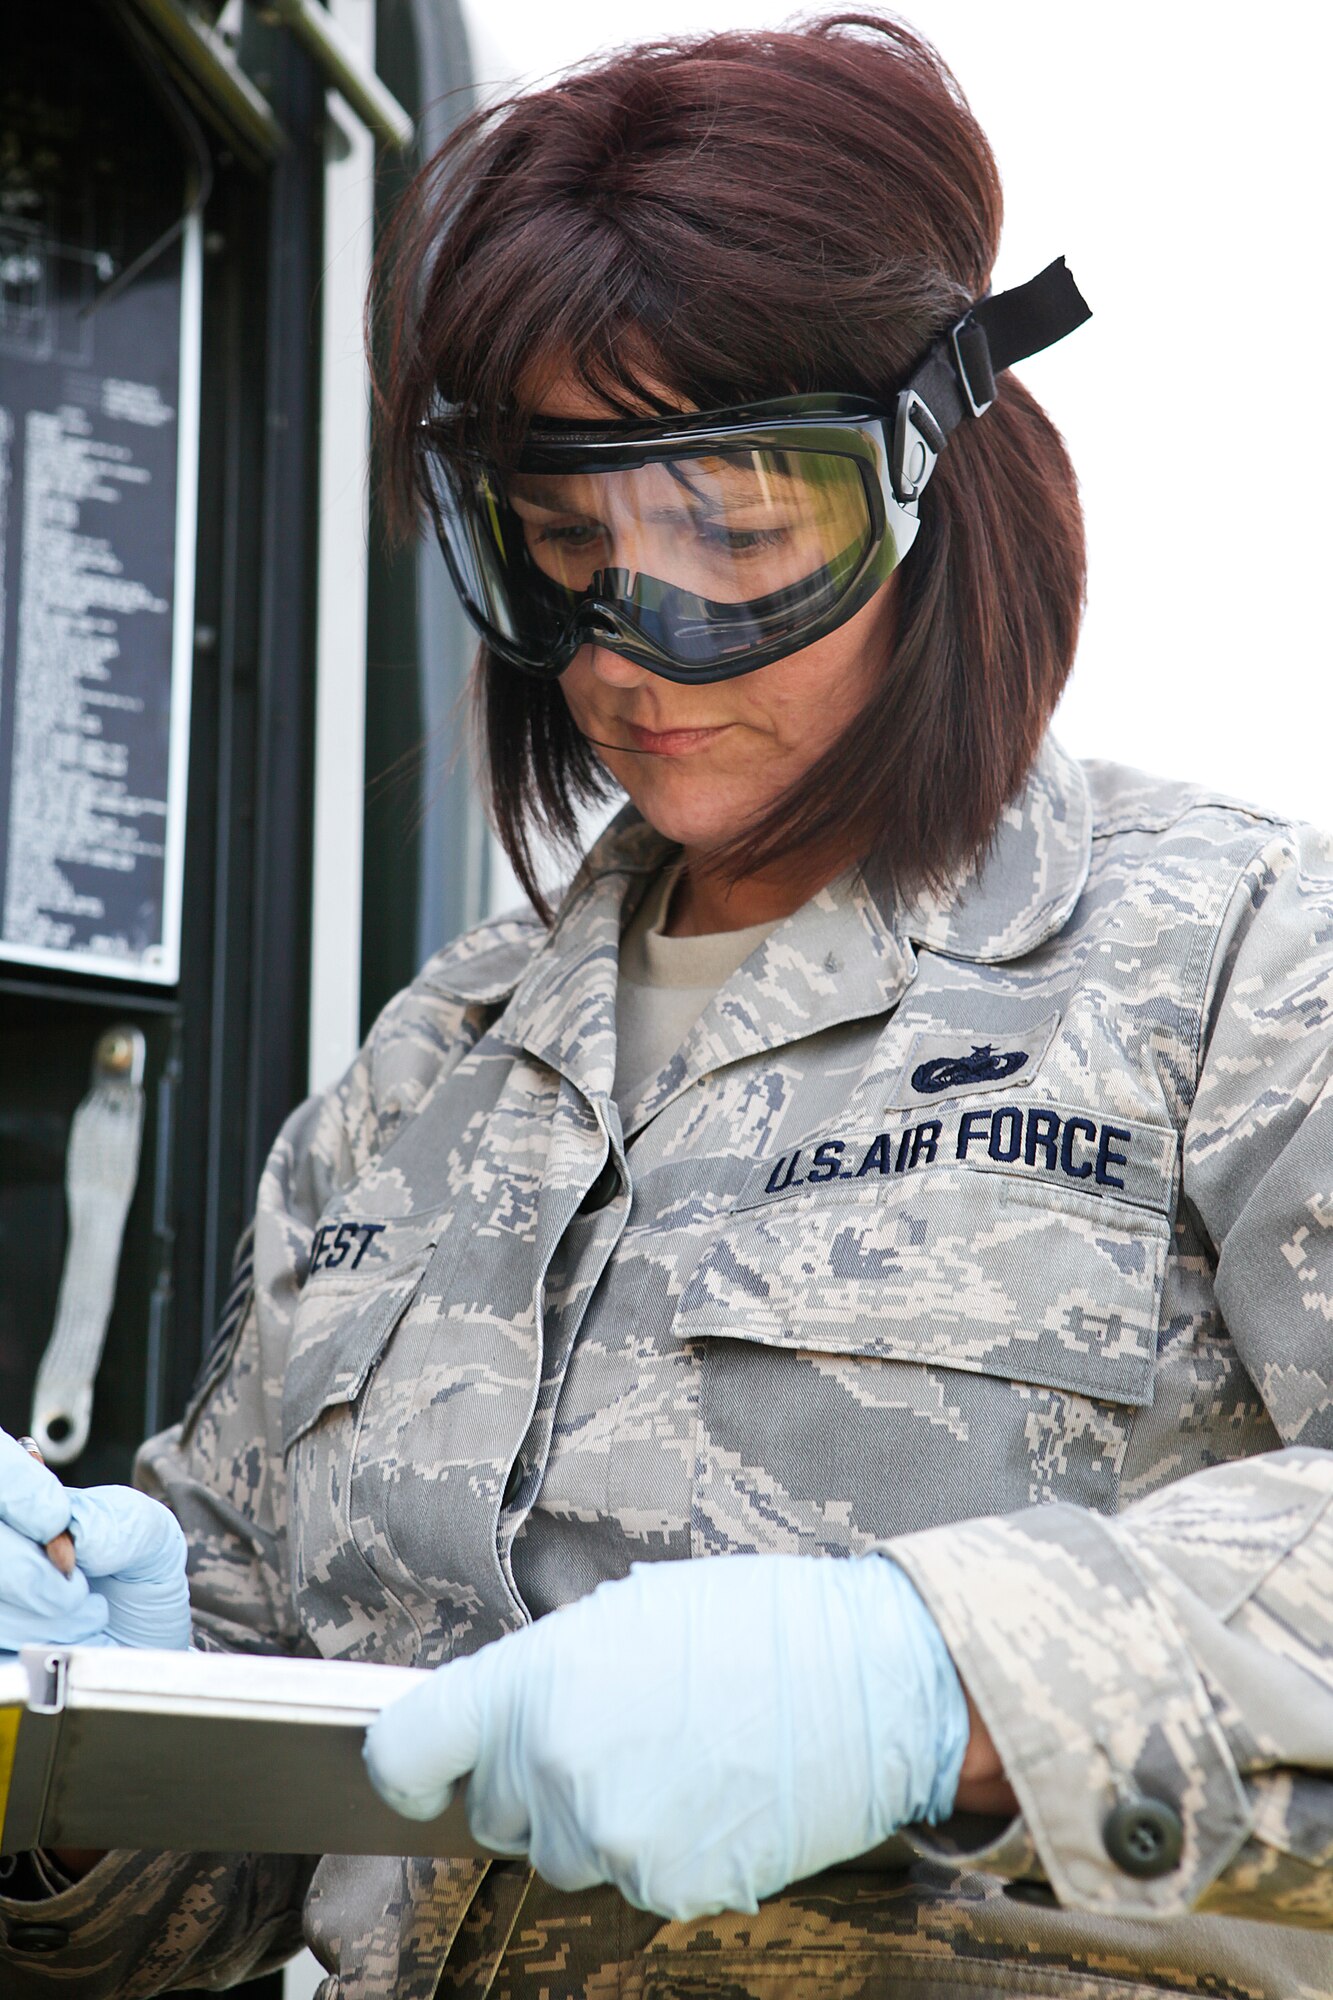 Technical Sgt. Debora West fills in an inspection log after collecting a sample of JP-8 jet fuel from an R-11 fueling truck as part of a routine quality assurance inspection of the truck’s fuel at Selfridge Air National Guard Base, May 15, 2010. Air Force fuels specialists are charged with routinely inspecting the fuel they provide to ensure that it is both “clean” – that it contains no containments – and that it is “dry” – that it contains no water. (U.S. Air Force photo by Master Sgt. Terry Atwell) (RELEASED)